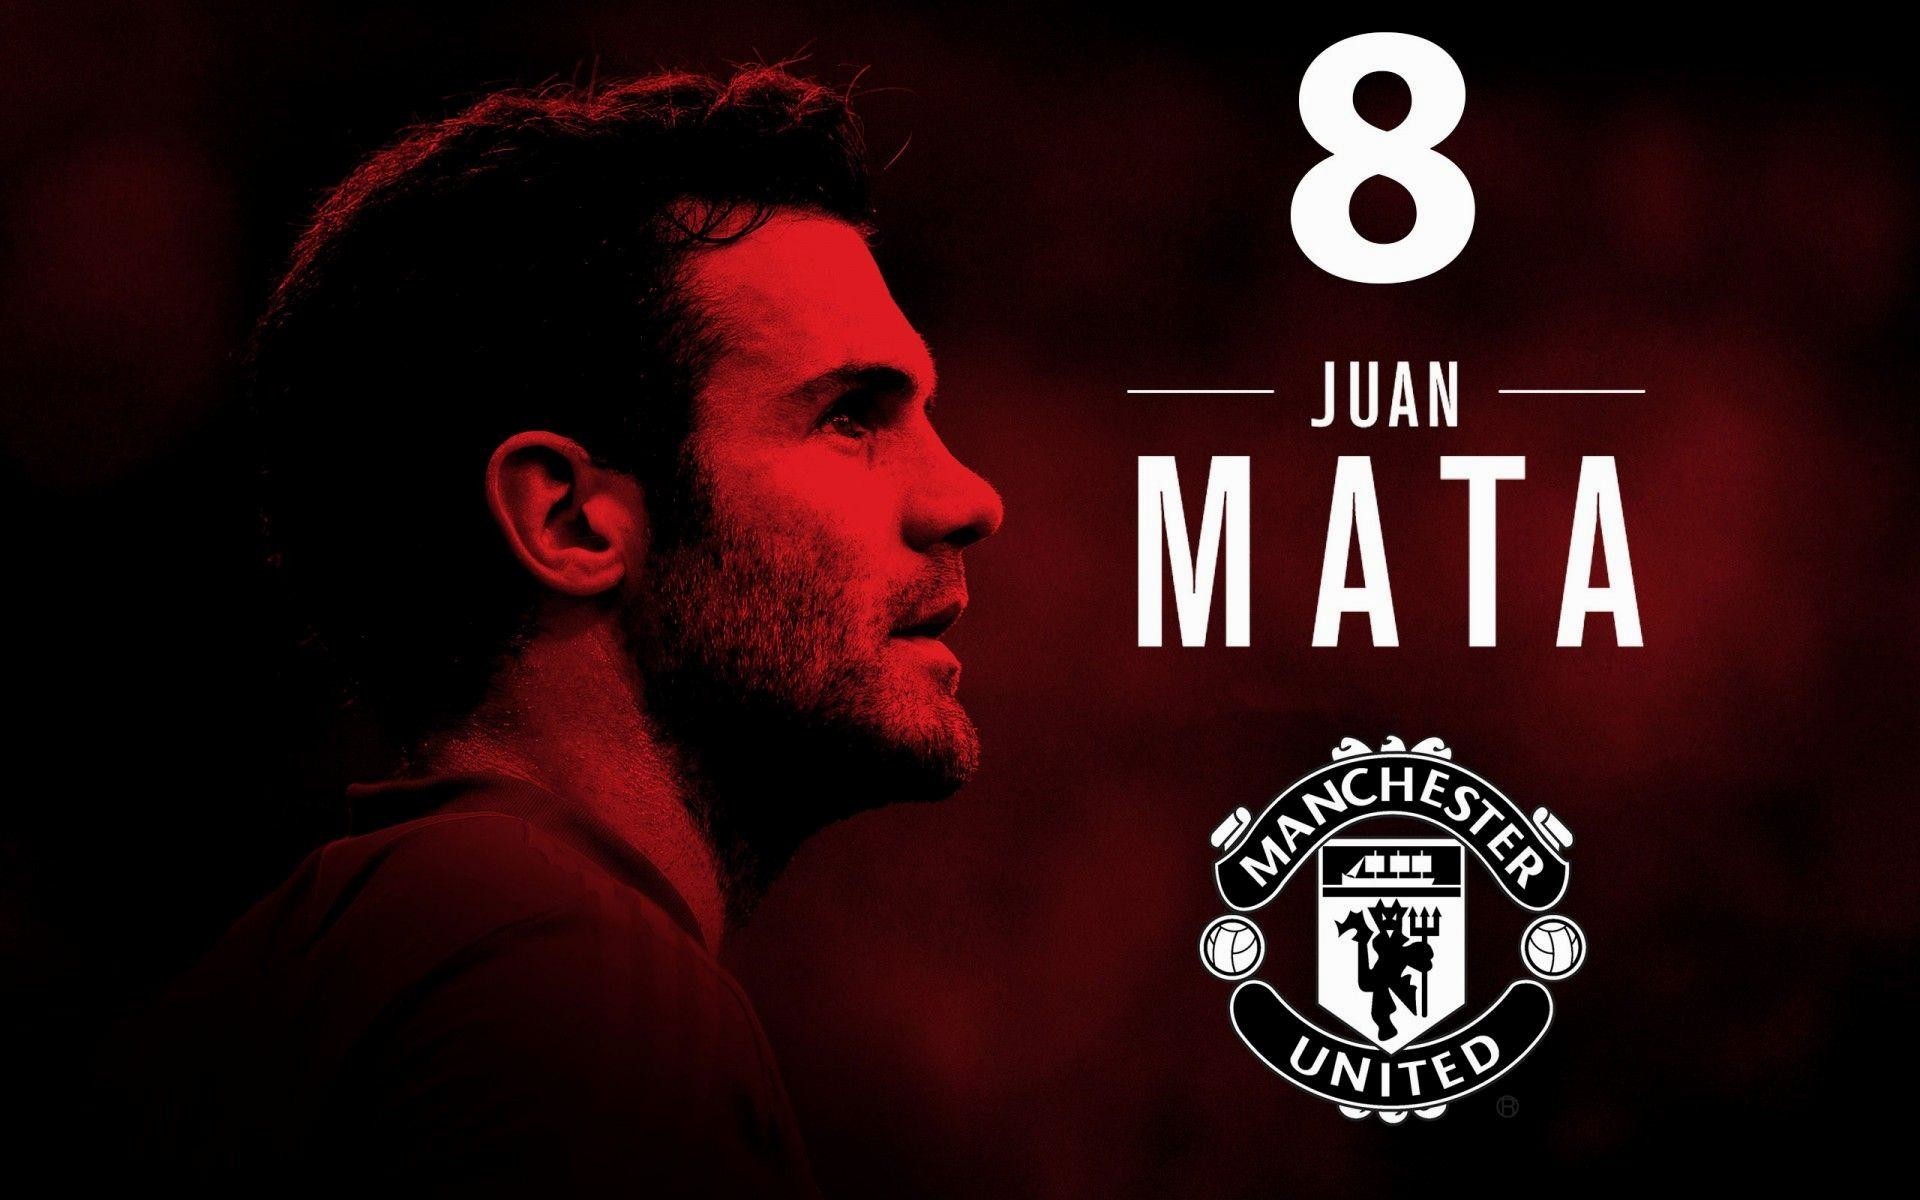 hinh nen manchester united 39 - wallpaper free download